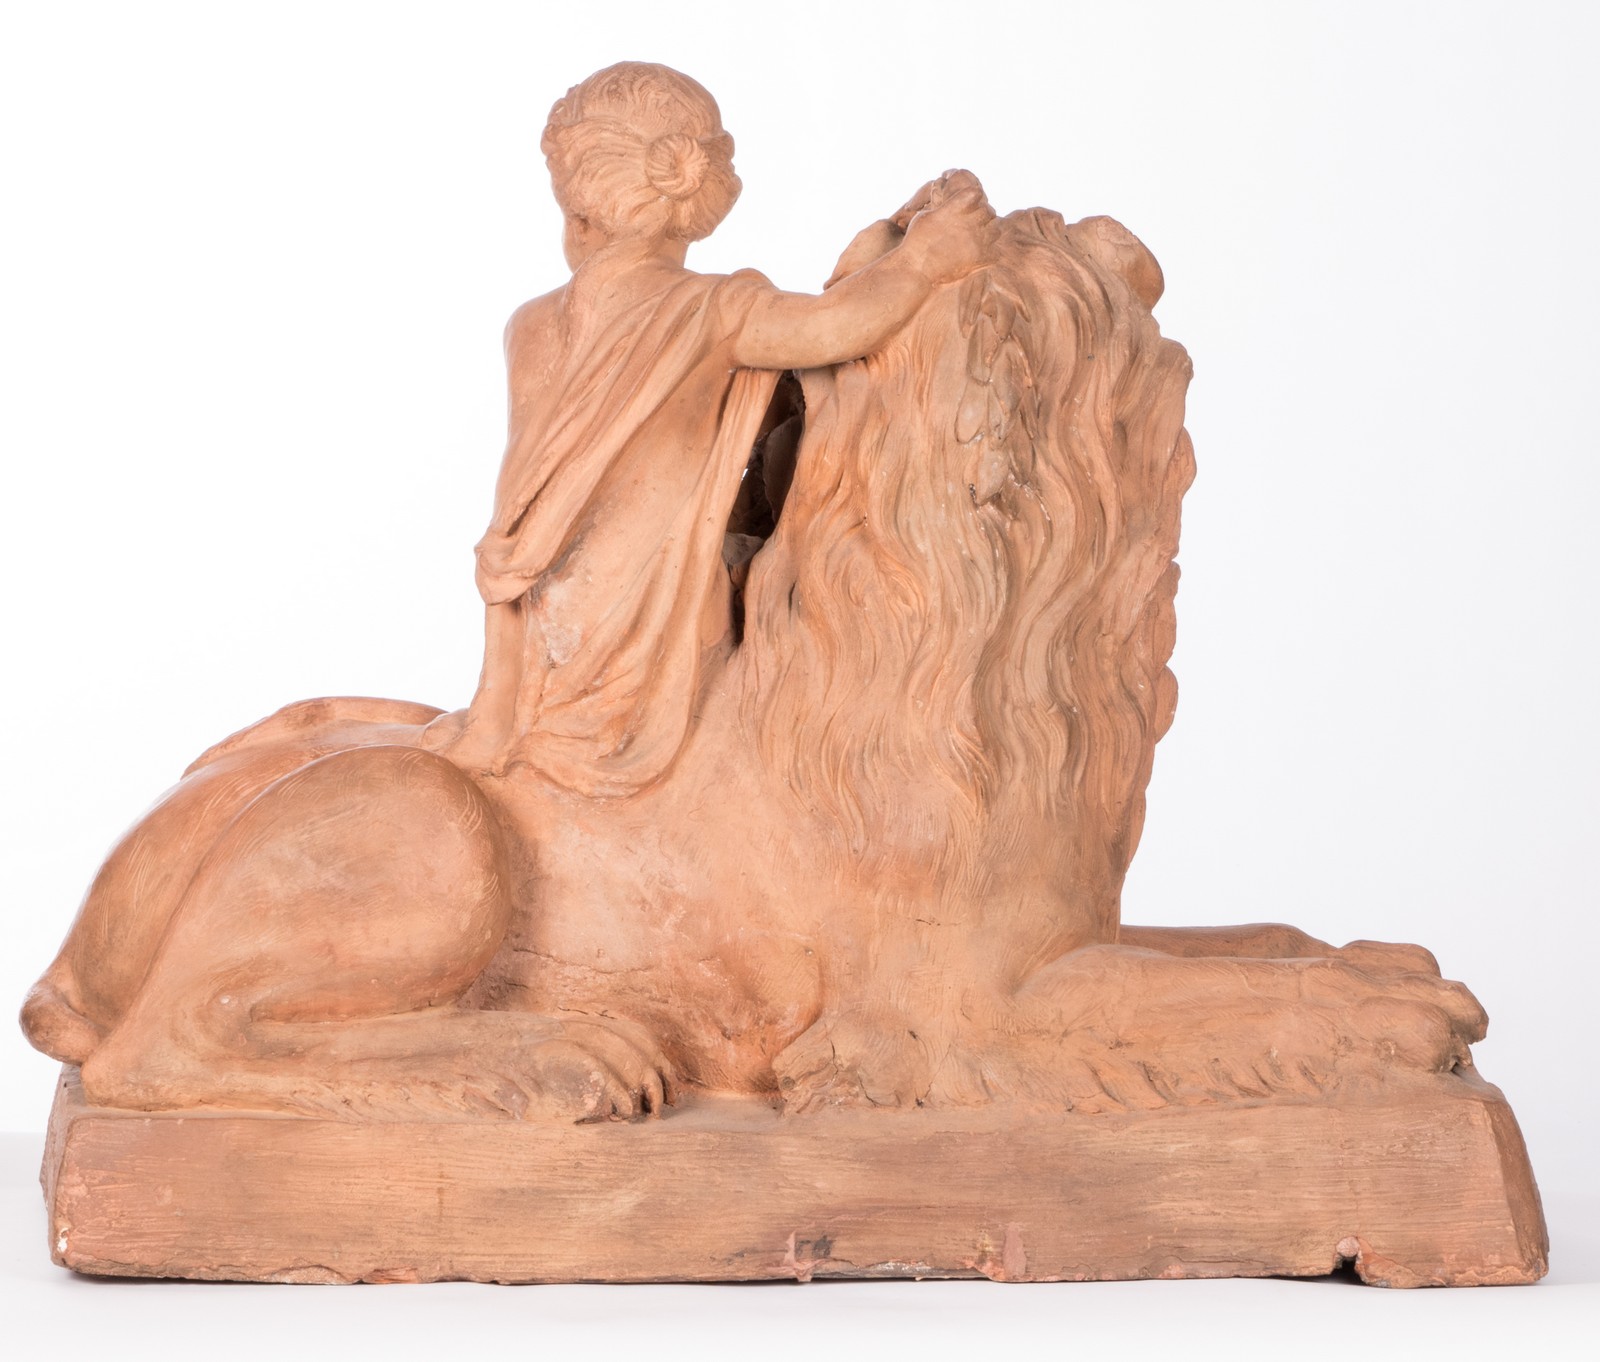 A large pair of terracotta sculptures depicting an allegoric scene, 19thC, H 78 - B 97 - D 35 cm - Image 10 of 62